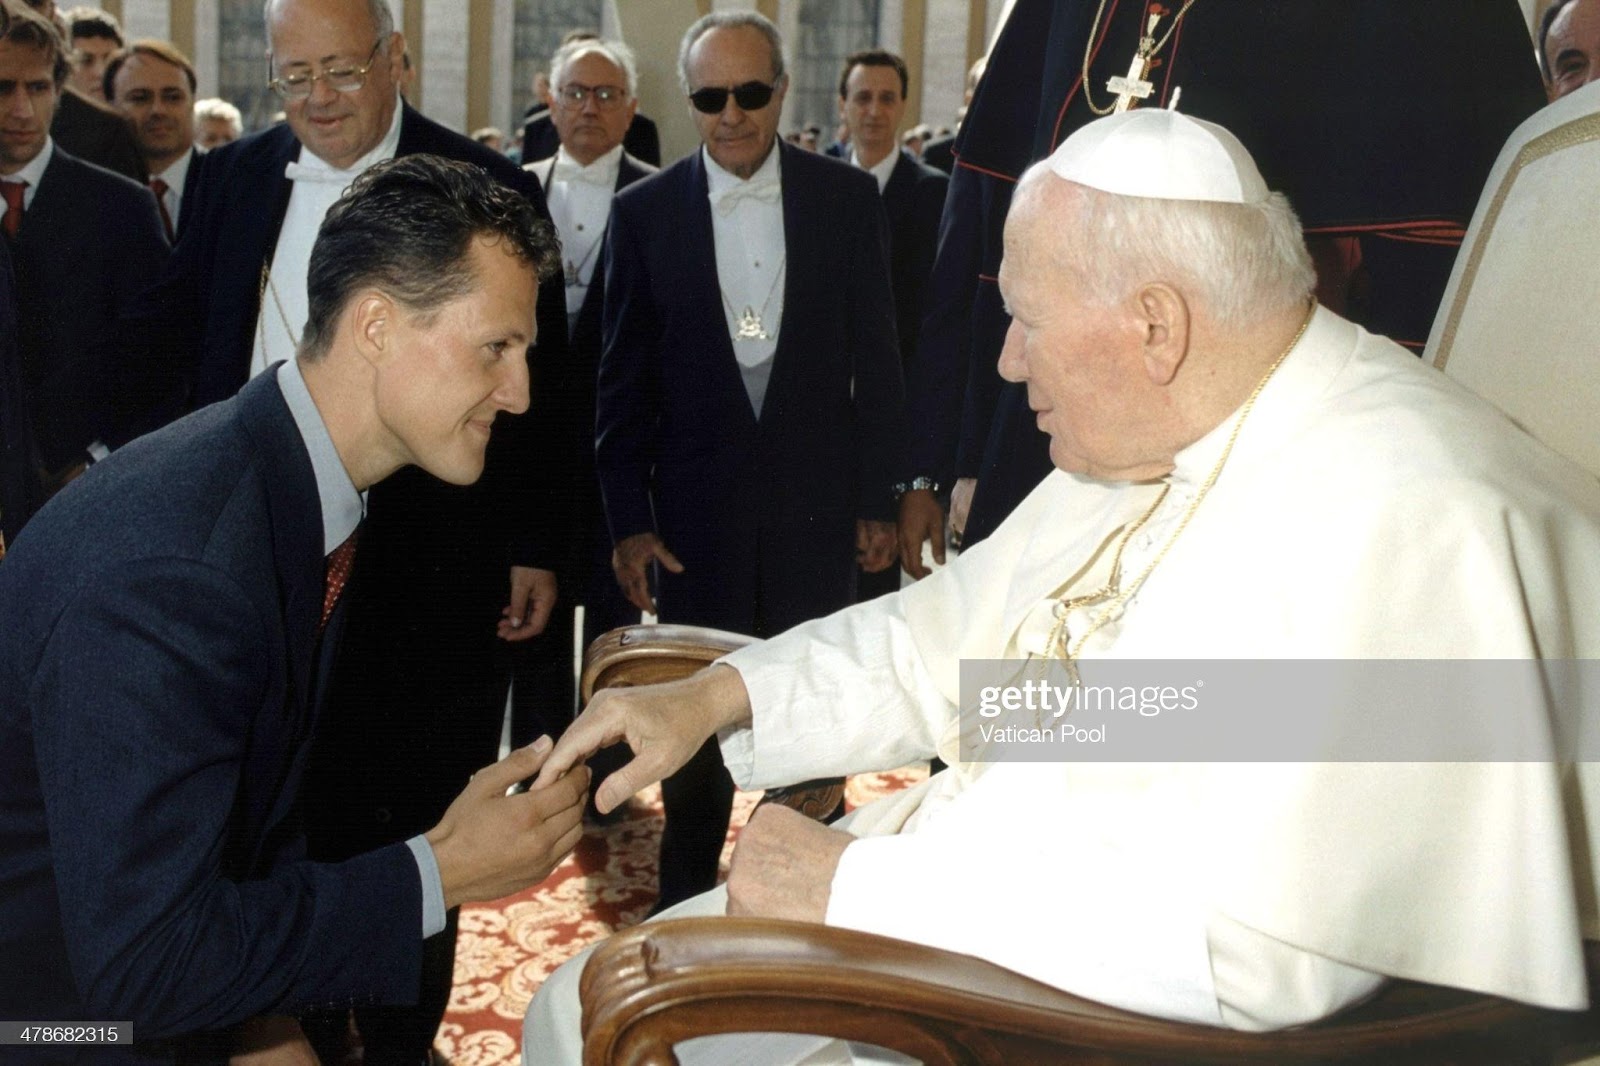 Pope John Paul II meets Michael Schumacher during an audience in St. Peter's Square on October 6, 1999 in Vatican City, Vatican. 